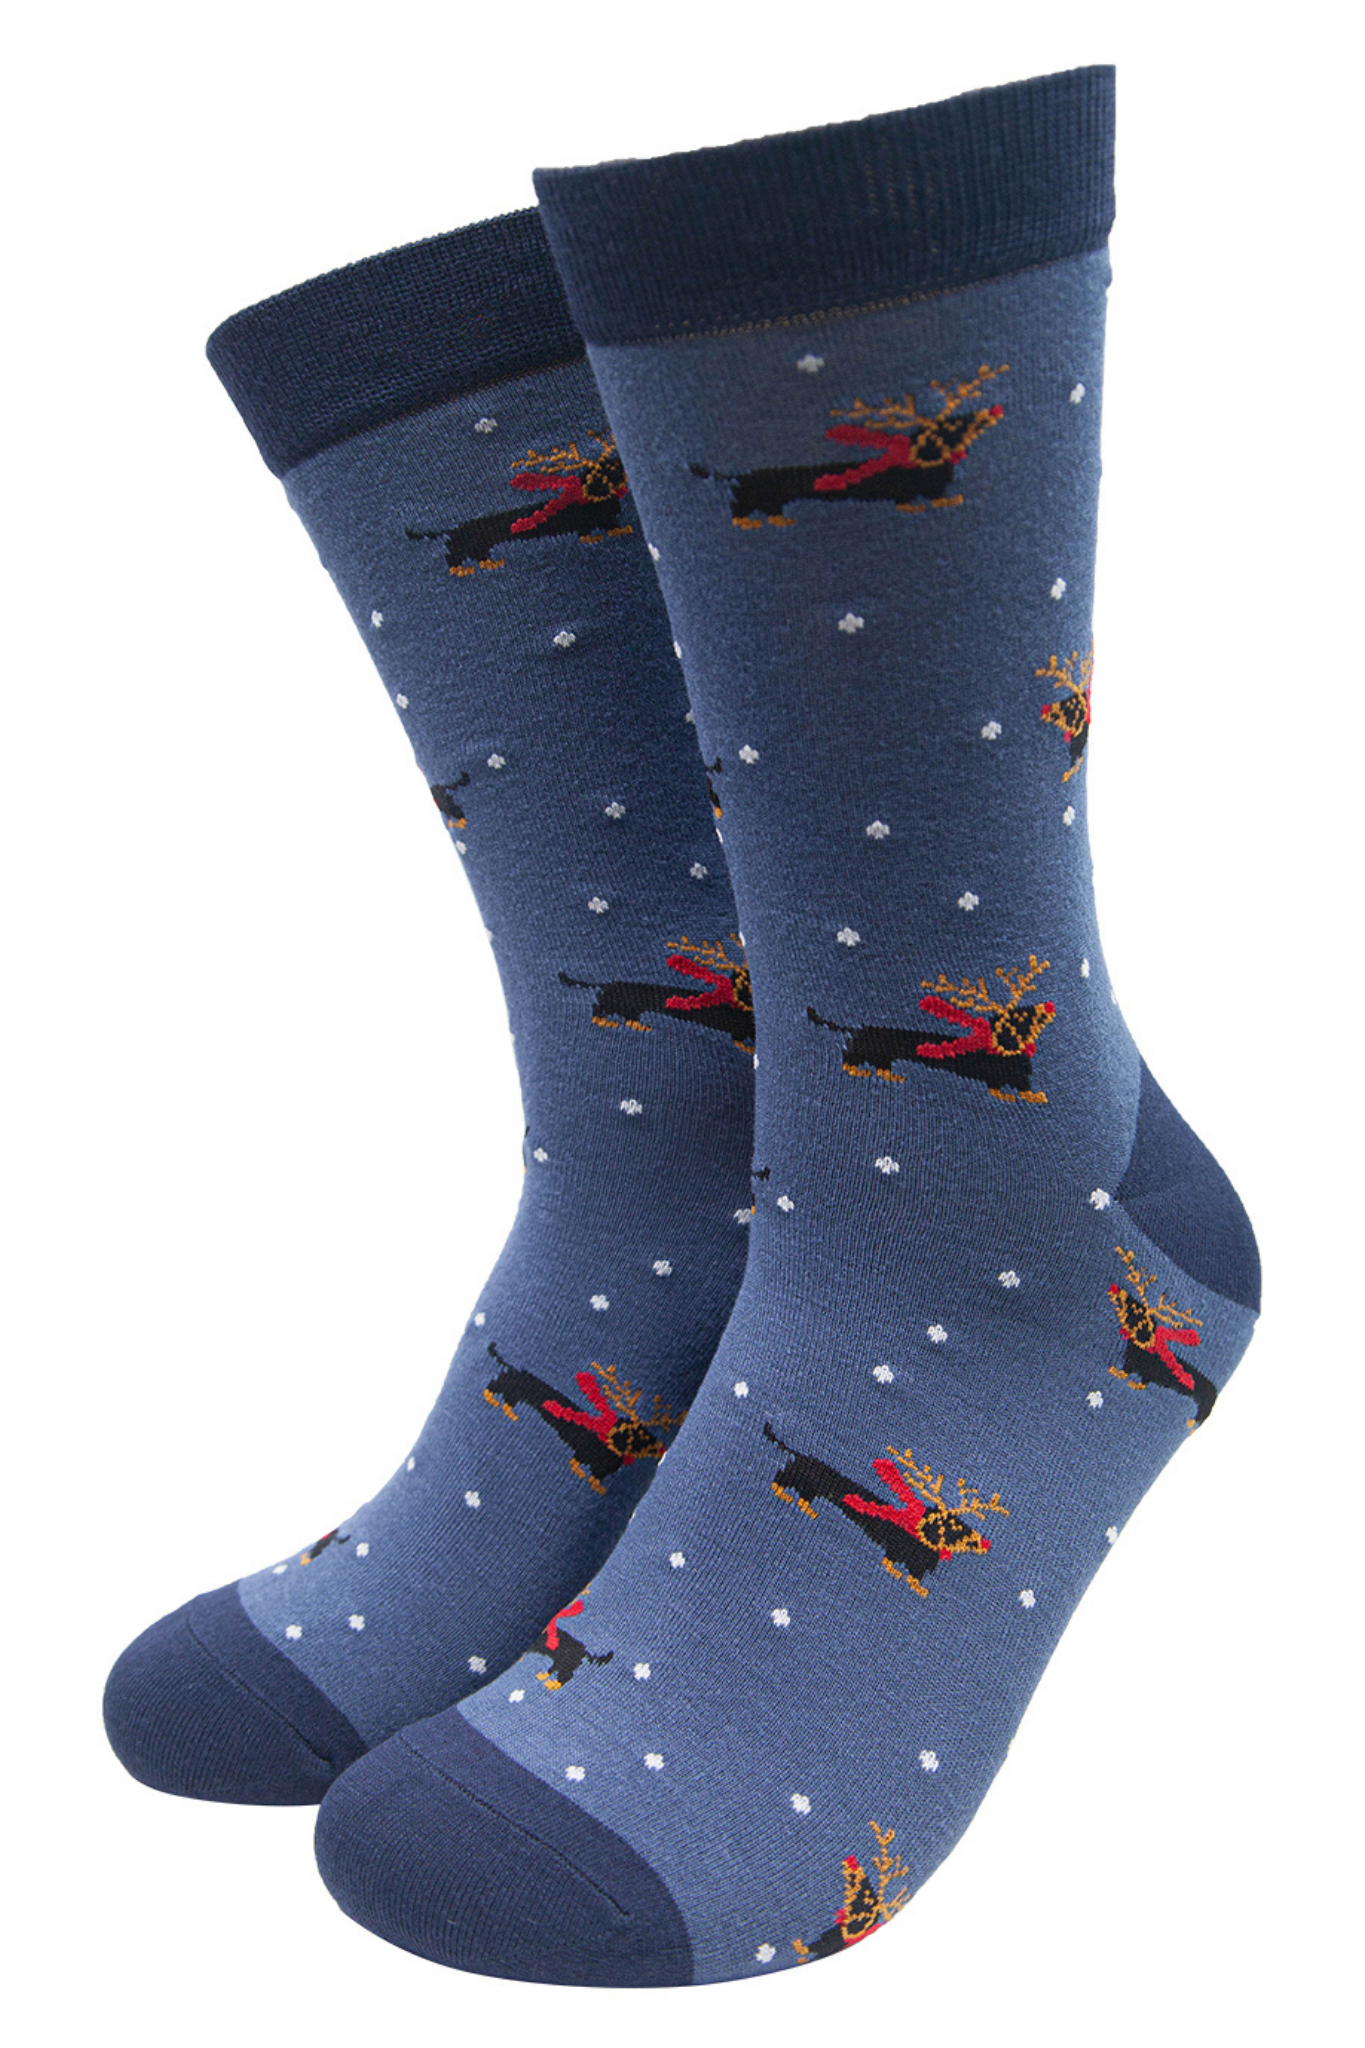 blue dress socks with a pattern of sausage dogs wearing reindeer antlers